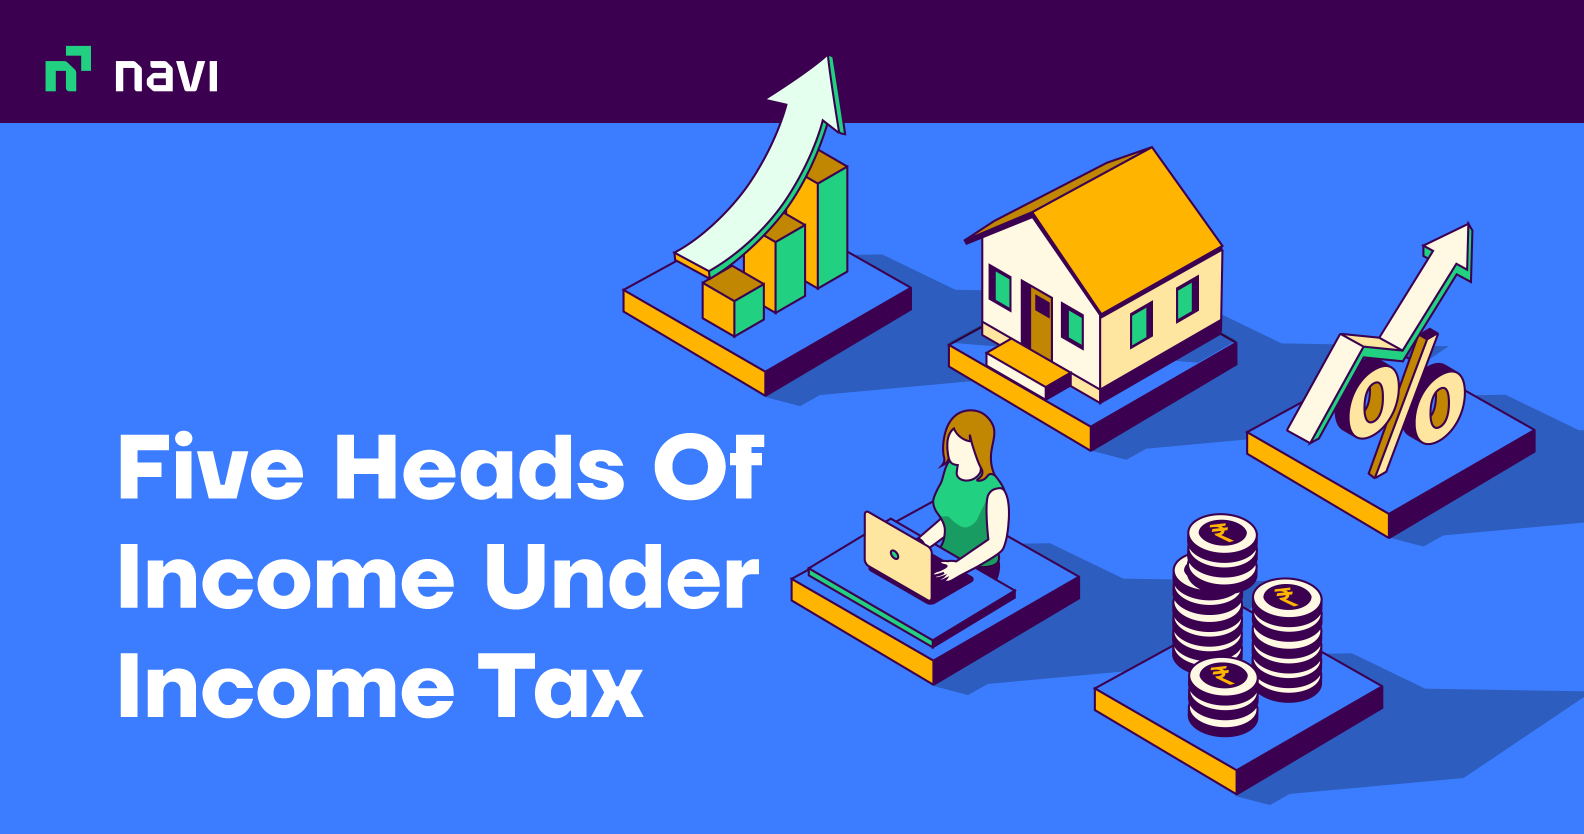 The Five Heads of Income Tax Under The Income Tax Act